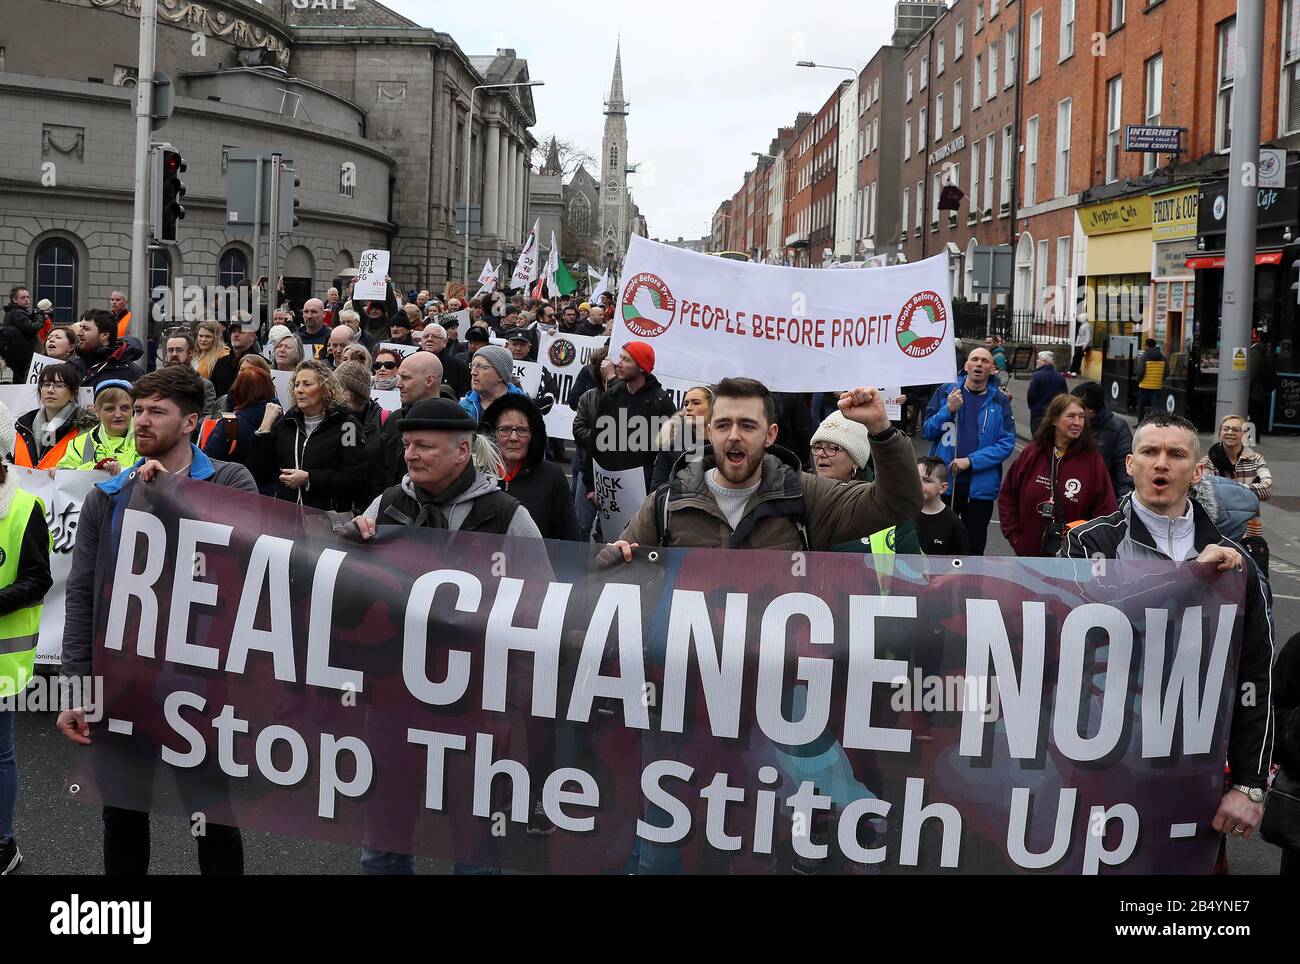 People take part in a march in Dublin's city centre organized to demonstrate opposition to the formation of a new government involving Fianna Fail or Fine Gael. Stock Photo